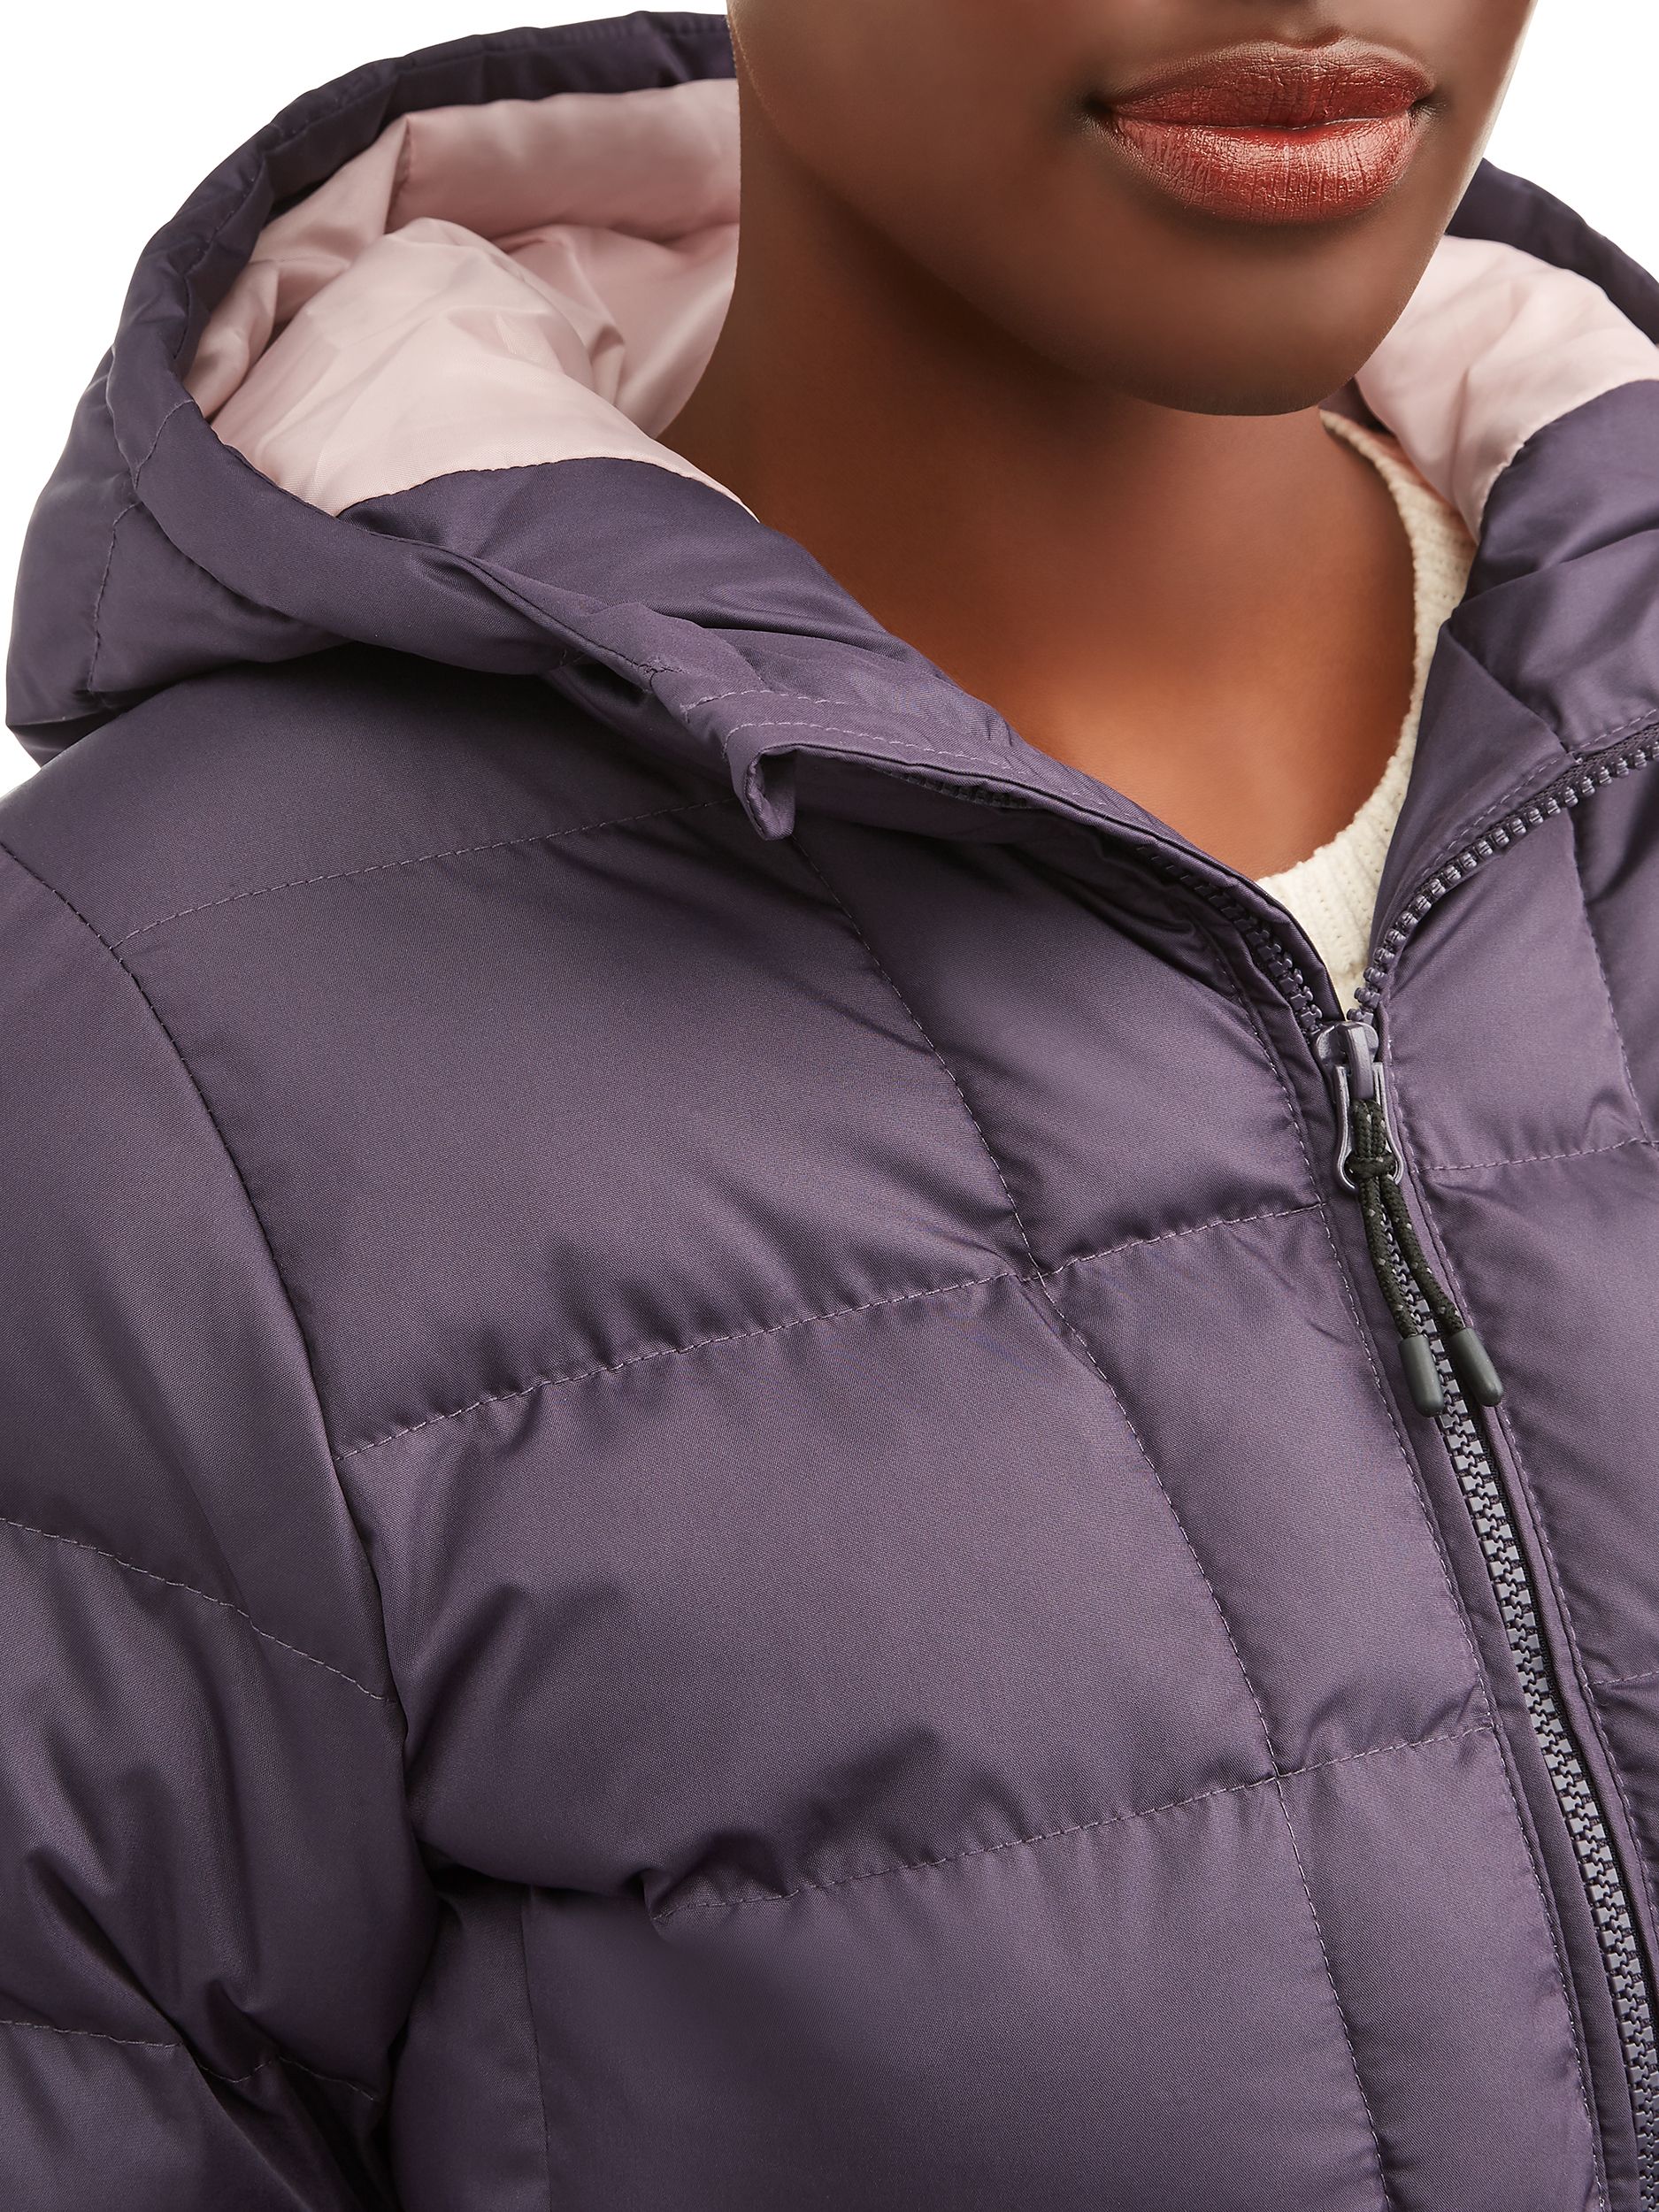 Iceburg Women's Long Insulated Parka - image 3 of 4